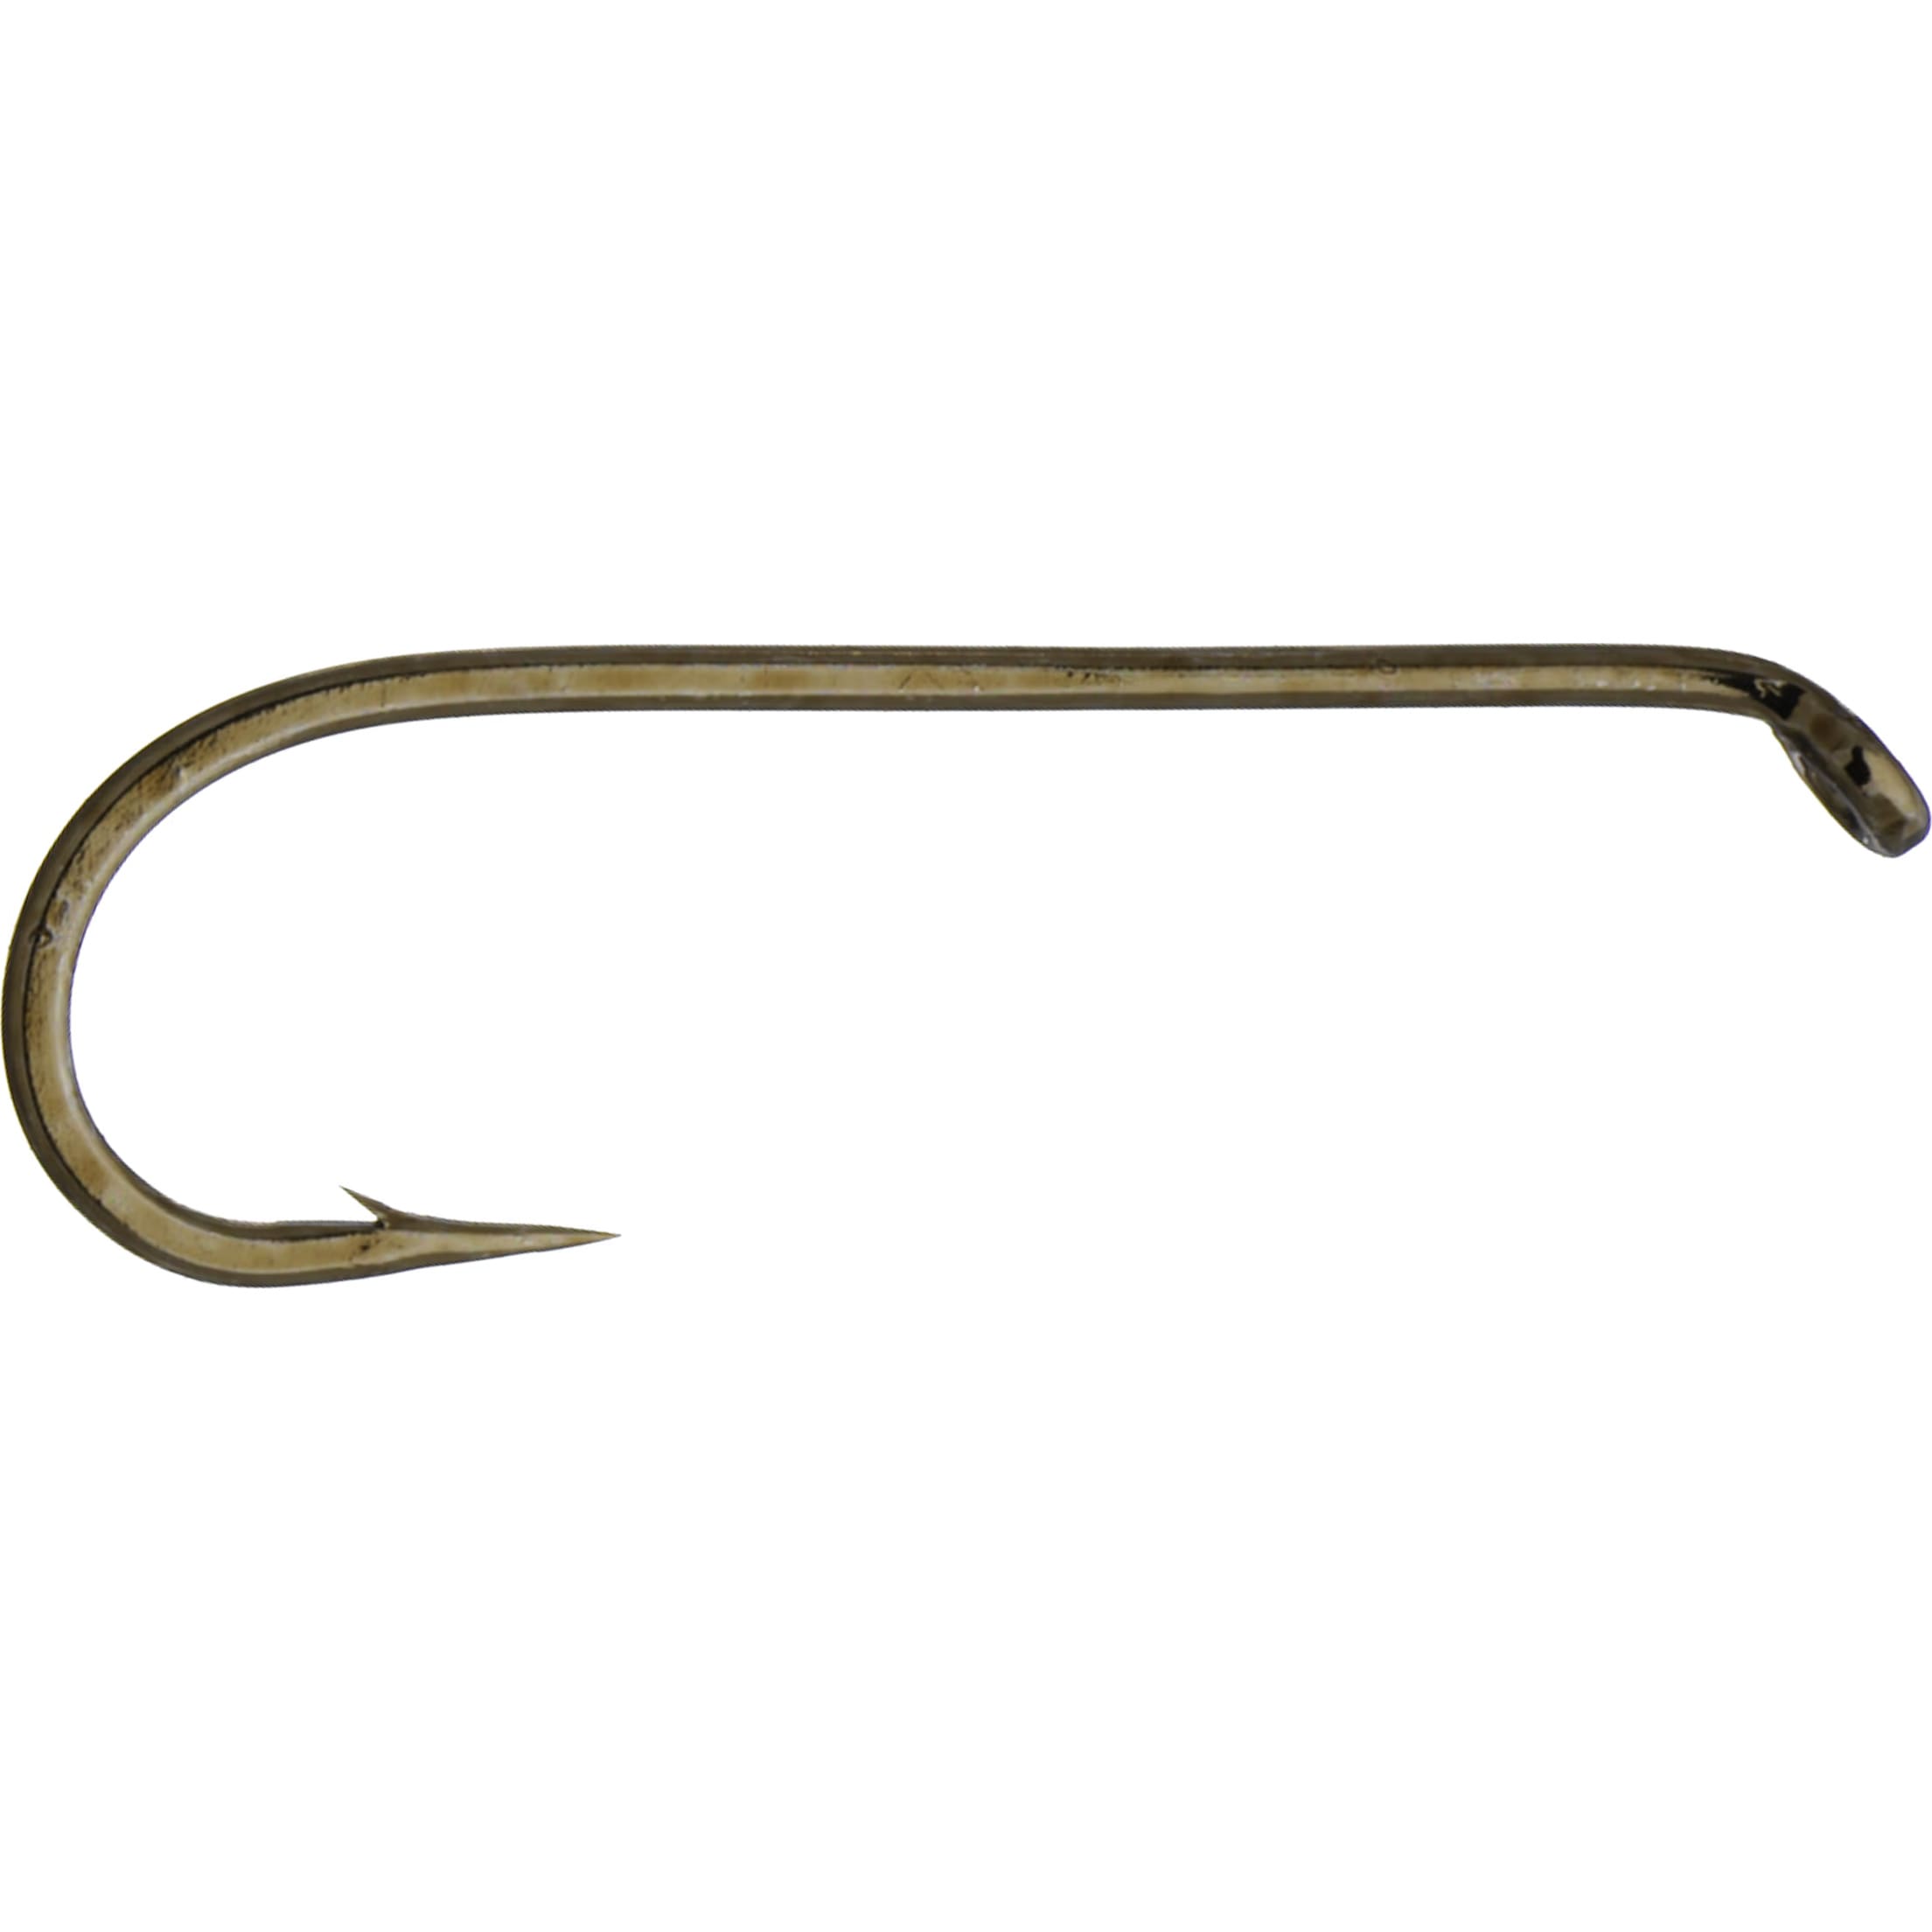 White River Fly Shop® 3X Long All-Purpose Fly Hook